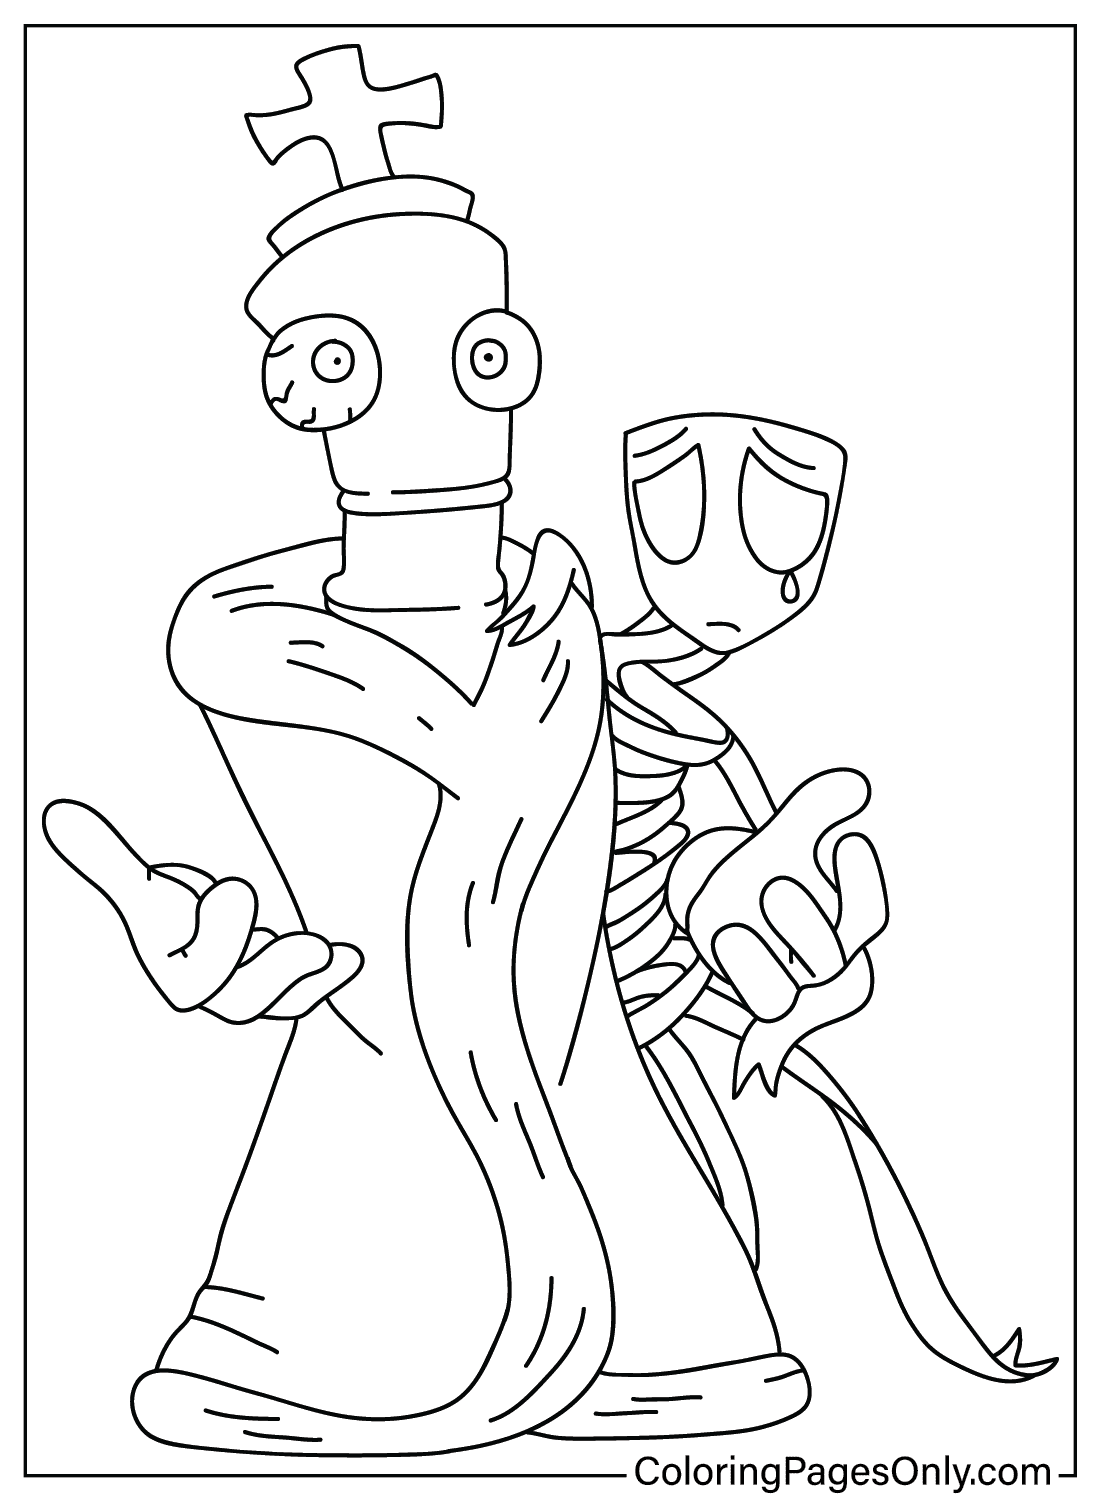 Gangle, Kinger Coloring Page from Gangle